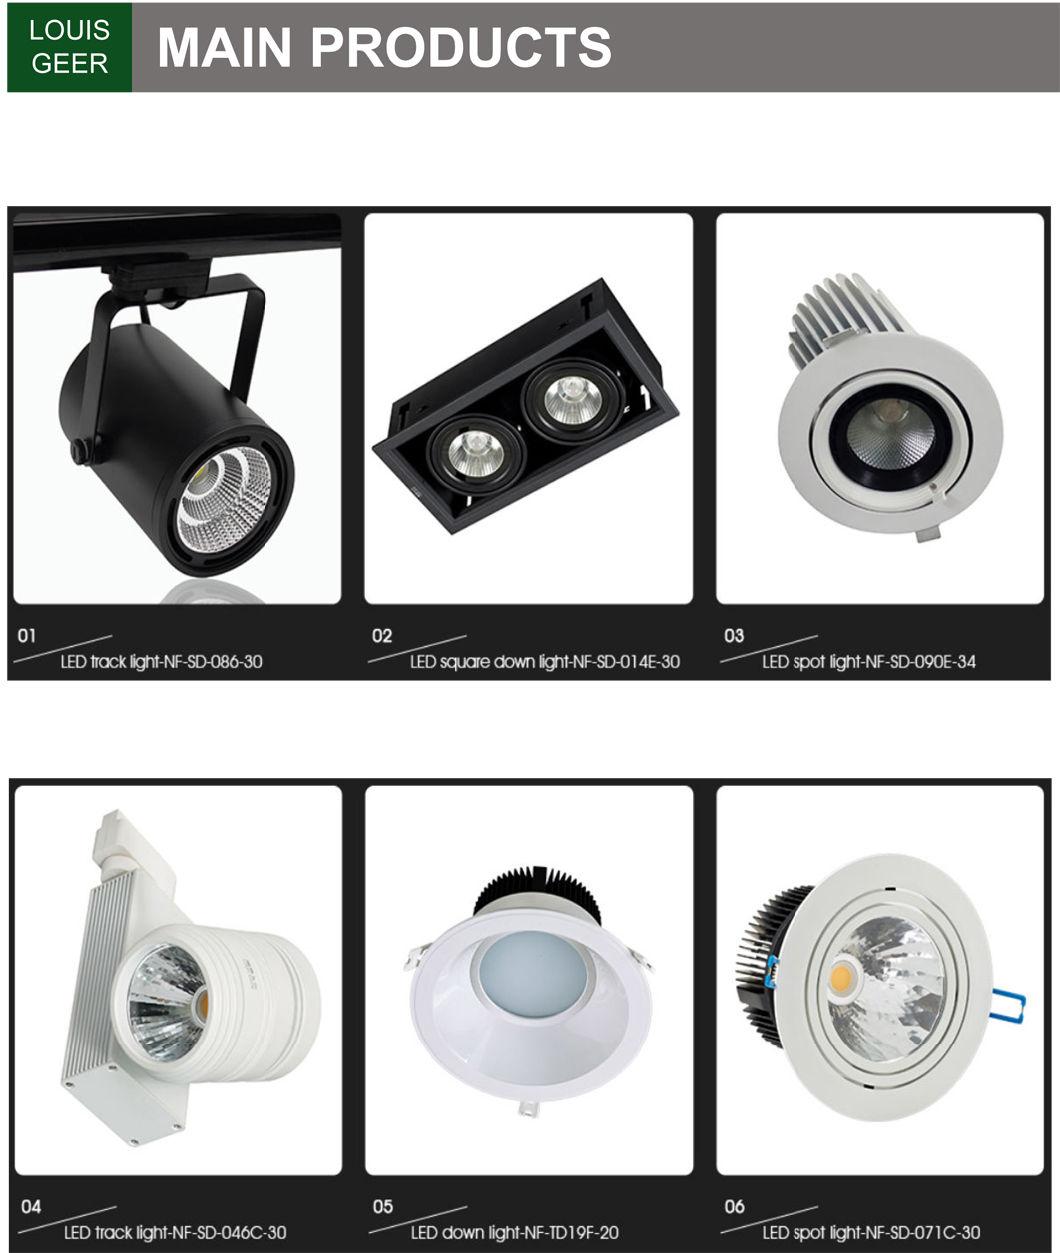 New Design Top Quality Aluminum Round Fixture Ceiling 15W Recessed LED Hotel Down Light